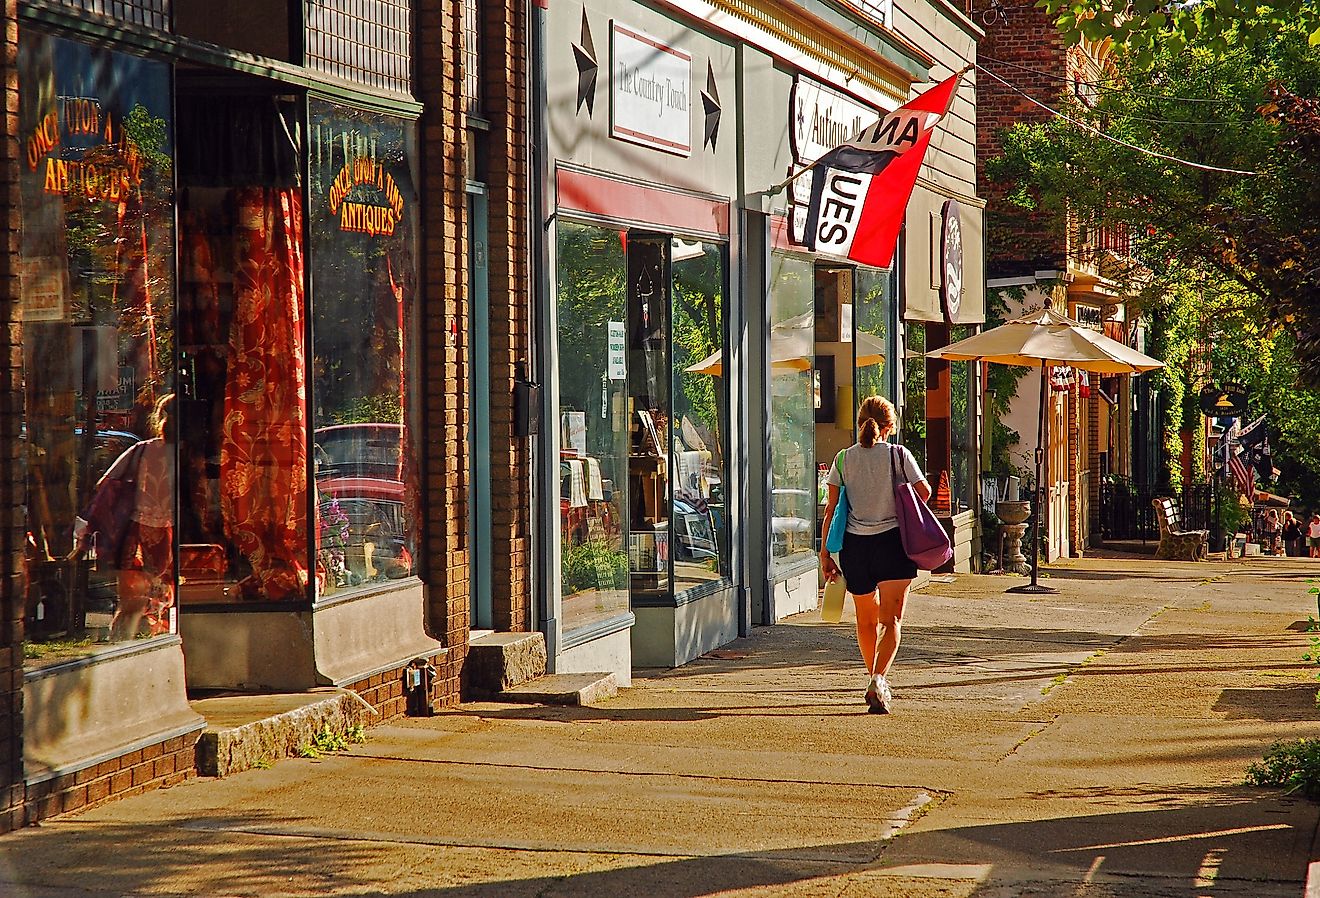 A young woman walks past independent stores and boutiques on a sunny day in Cold Spring, New York. Image credit James Kirkikis via Shutterstock